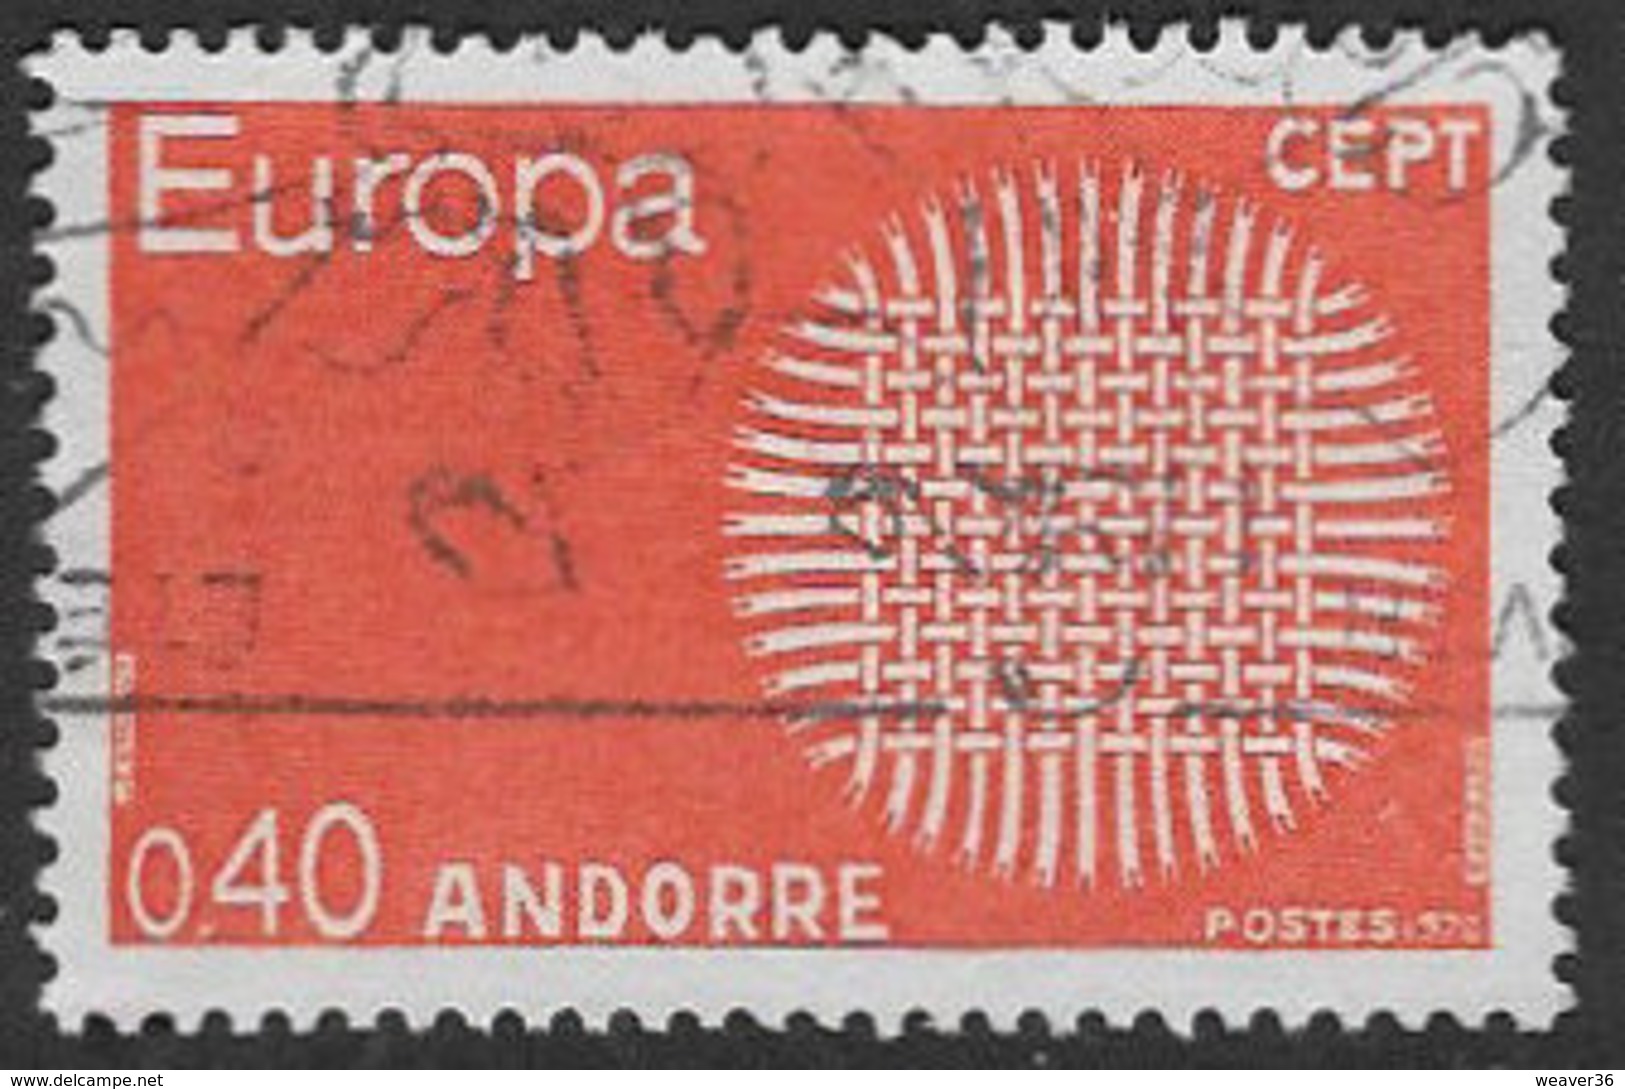 Andorra (French POs) SG F222 1970 Europa 40c Good/fine Used [39/32297/7D] - Used Stamps